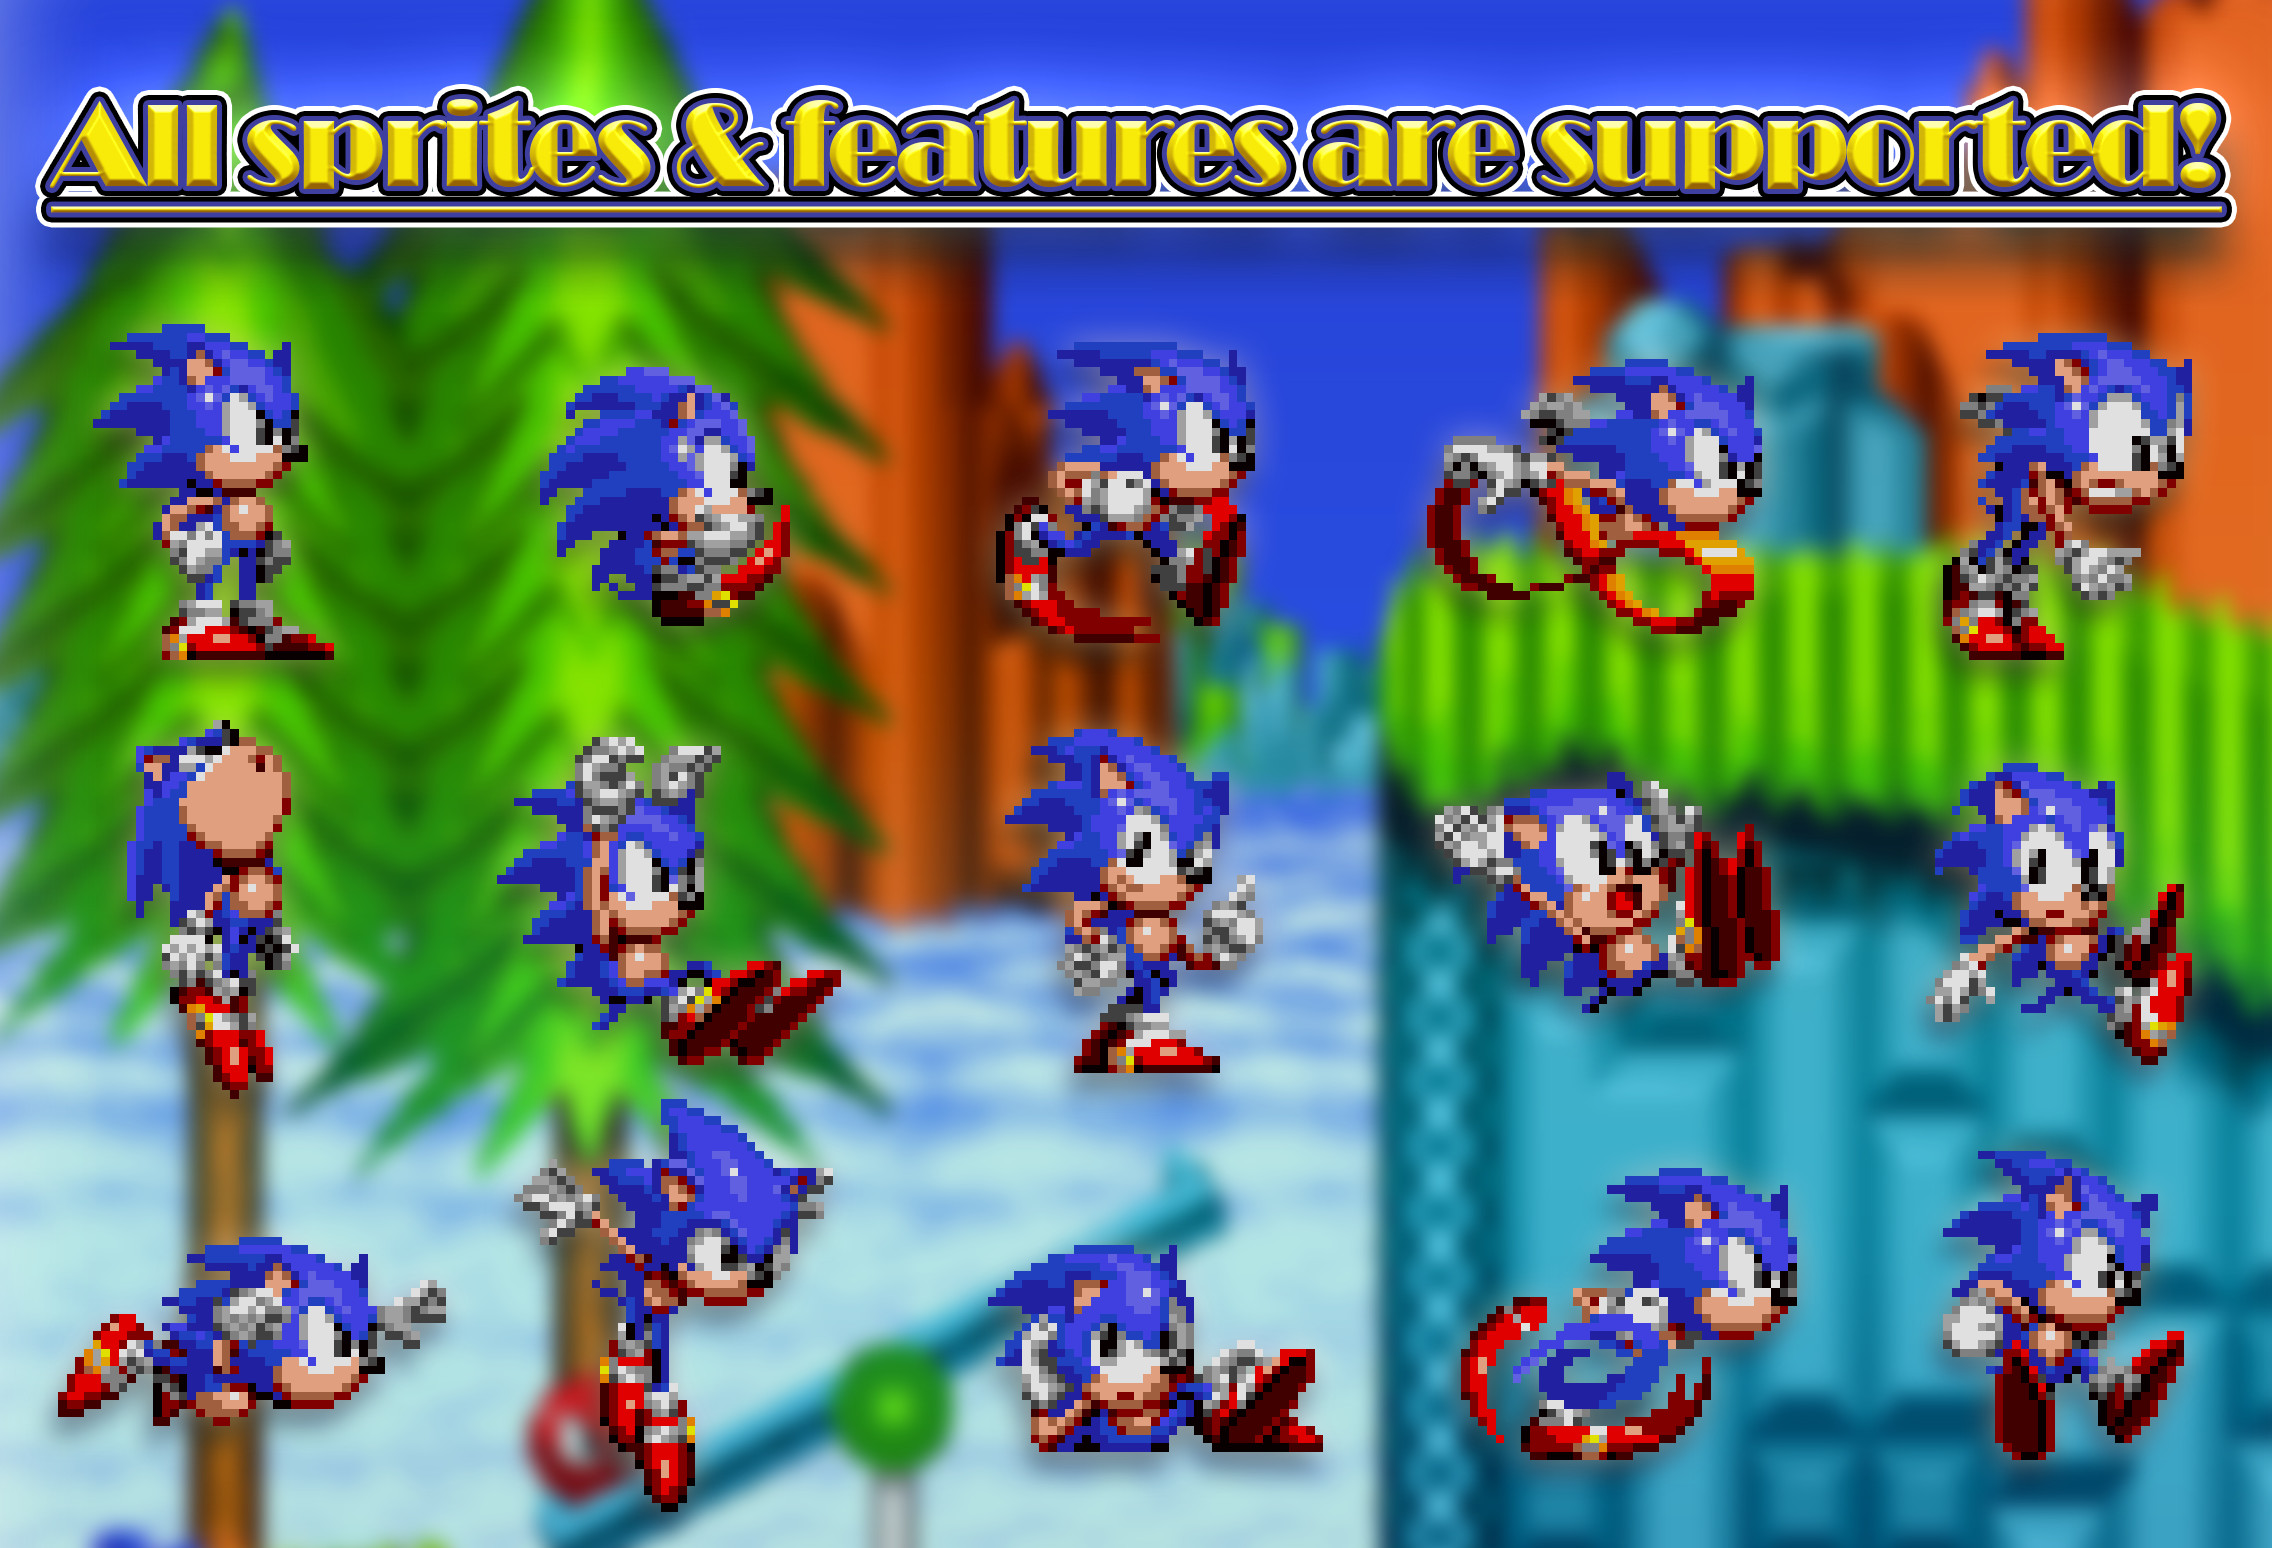 Sonic 2 HD inspired sonic [Sonic The Hedgehog 2 Absolute] [Concepts]